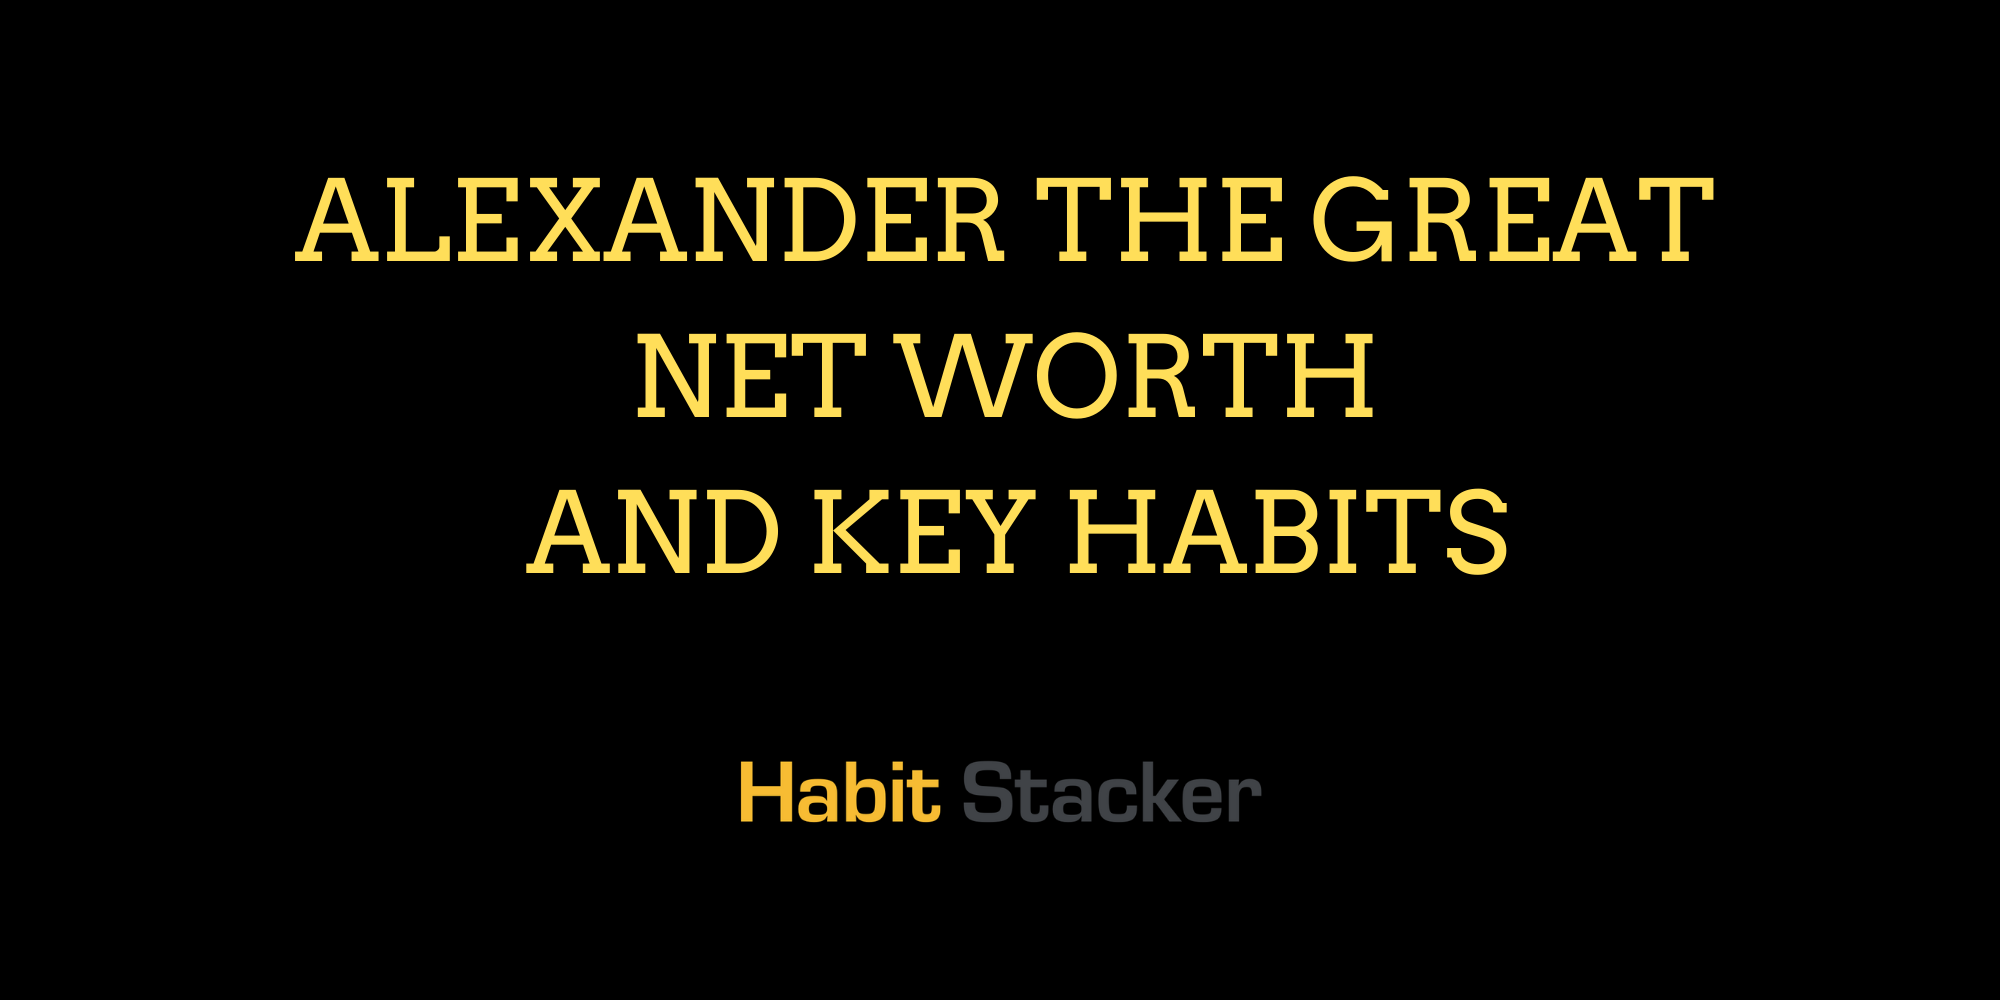 Alexander The Great Net Worth and Key Habits